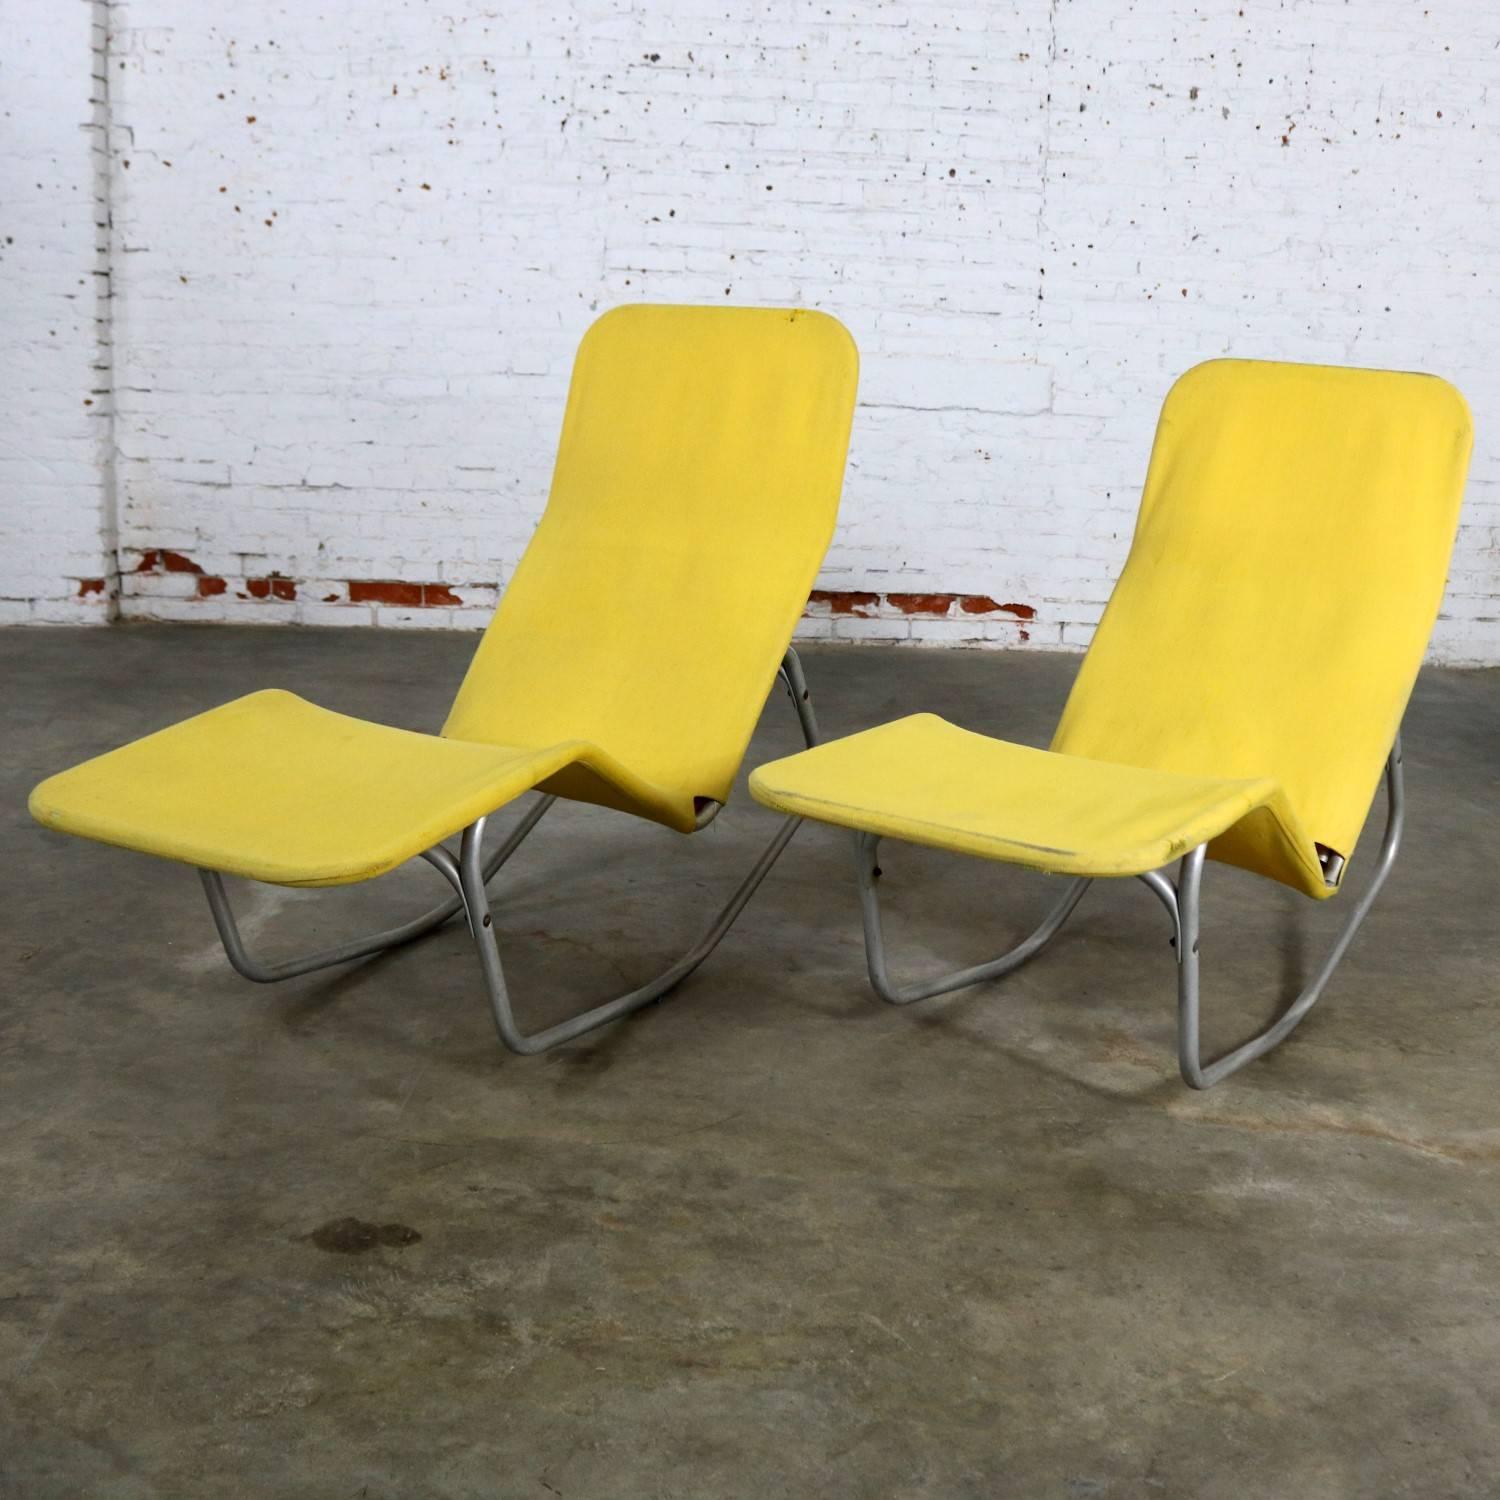 Exceptional pair of Barwa lounge chairs designed by Edgar Bartolucci and John Waldheim. Made of aluminium extruded tube with a yellow canvas sling. The aluminium is weathered from being outside for their lifetime as they were intended, and the